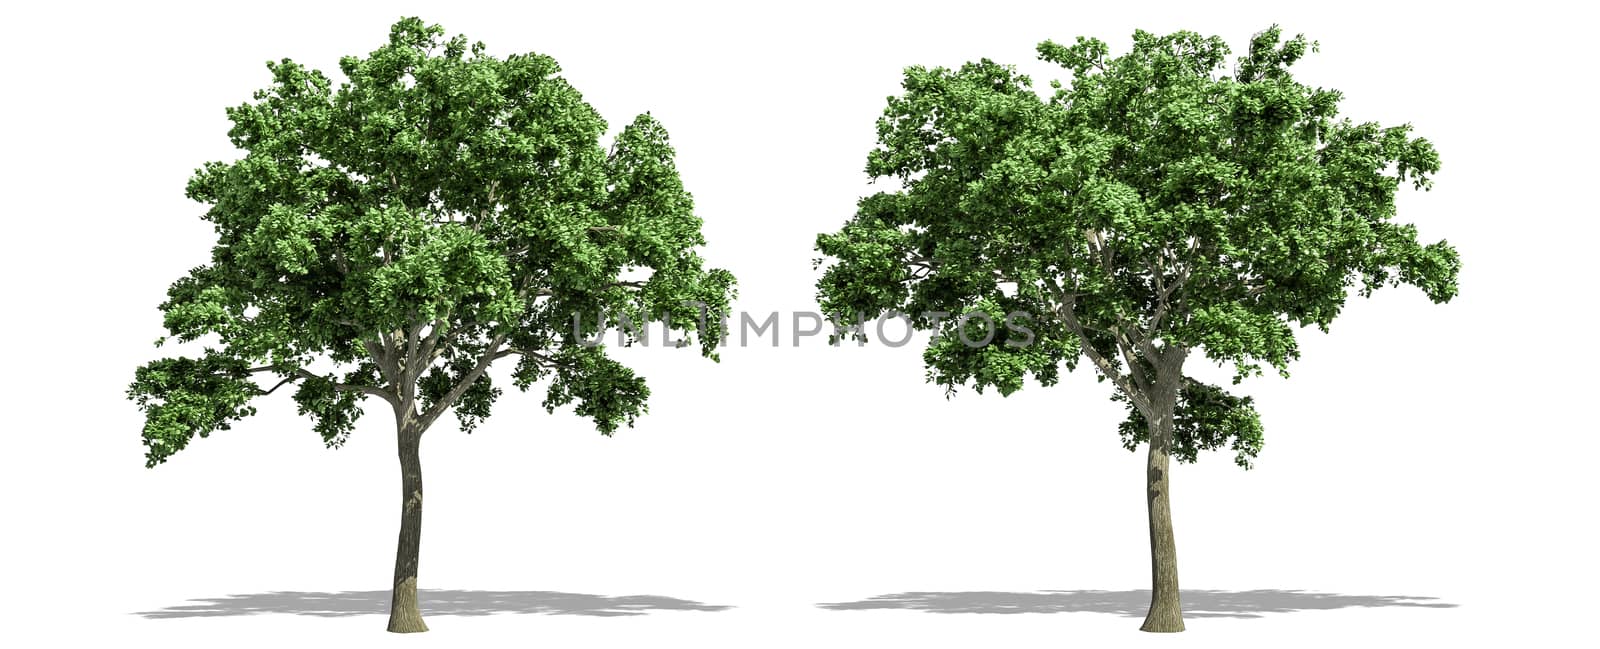 Beautiful Ulmus tree isolated and cutting on a white background with clipping path. by anotestocker